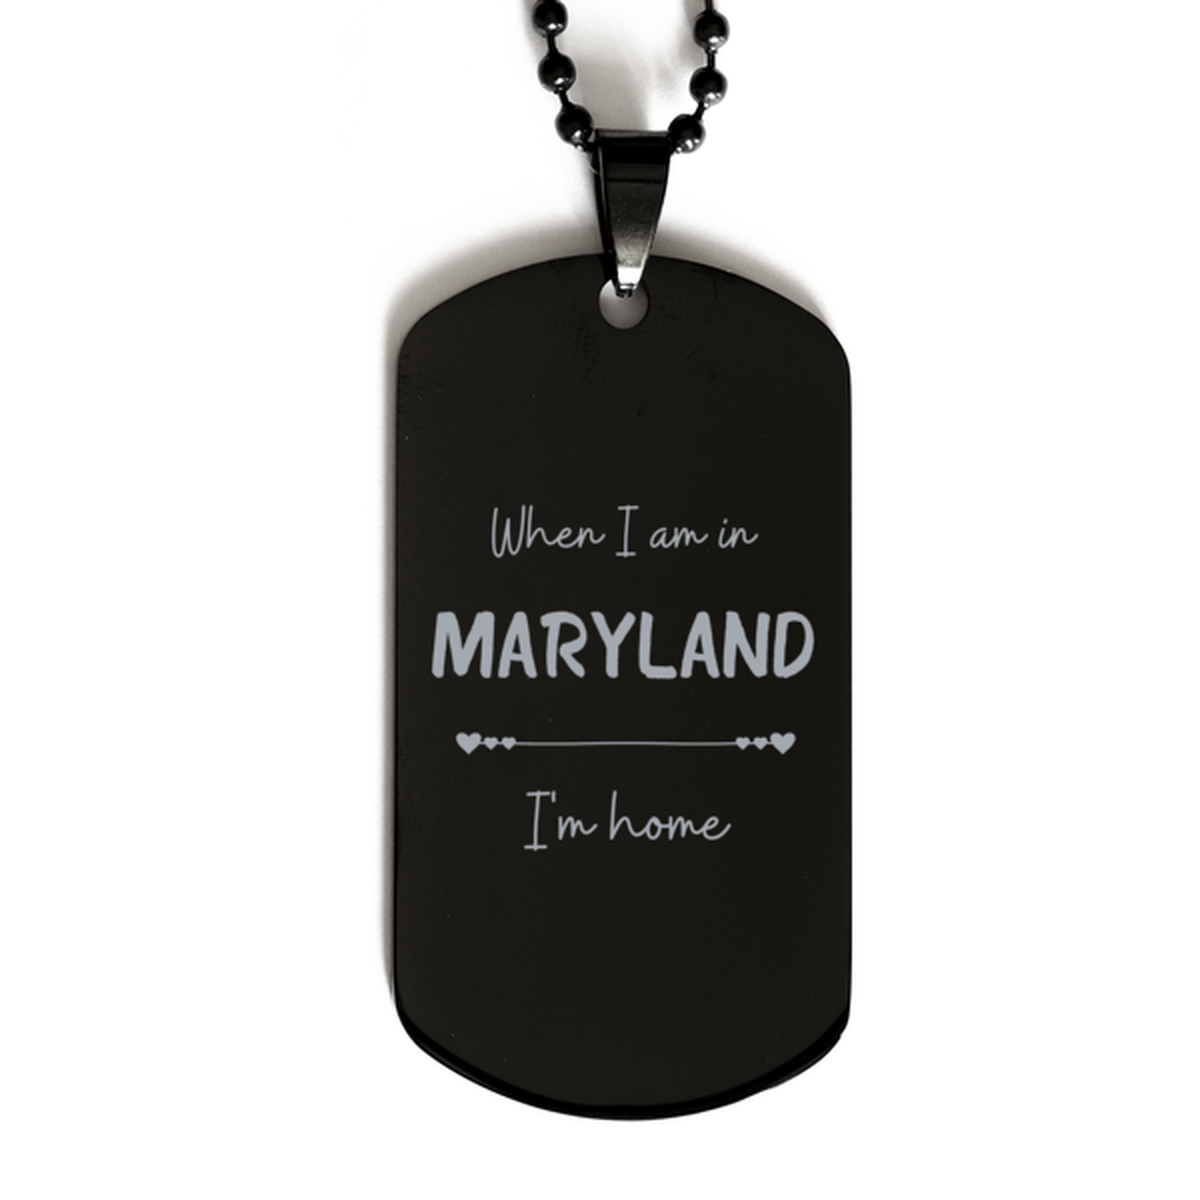 When I am in Maryland I'm home Black Dog Tag, Cheap Gifts For Maryland, State Maryland Birthday Gifts for Friends Coworker